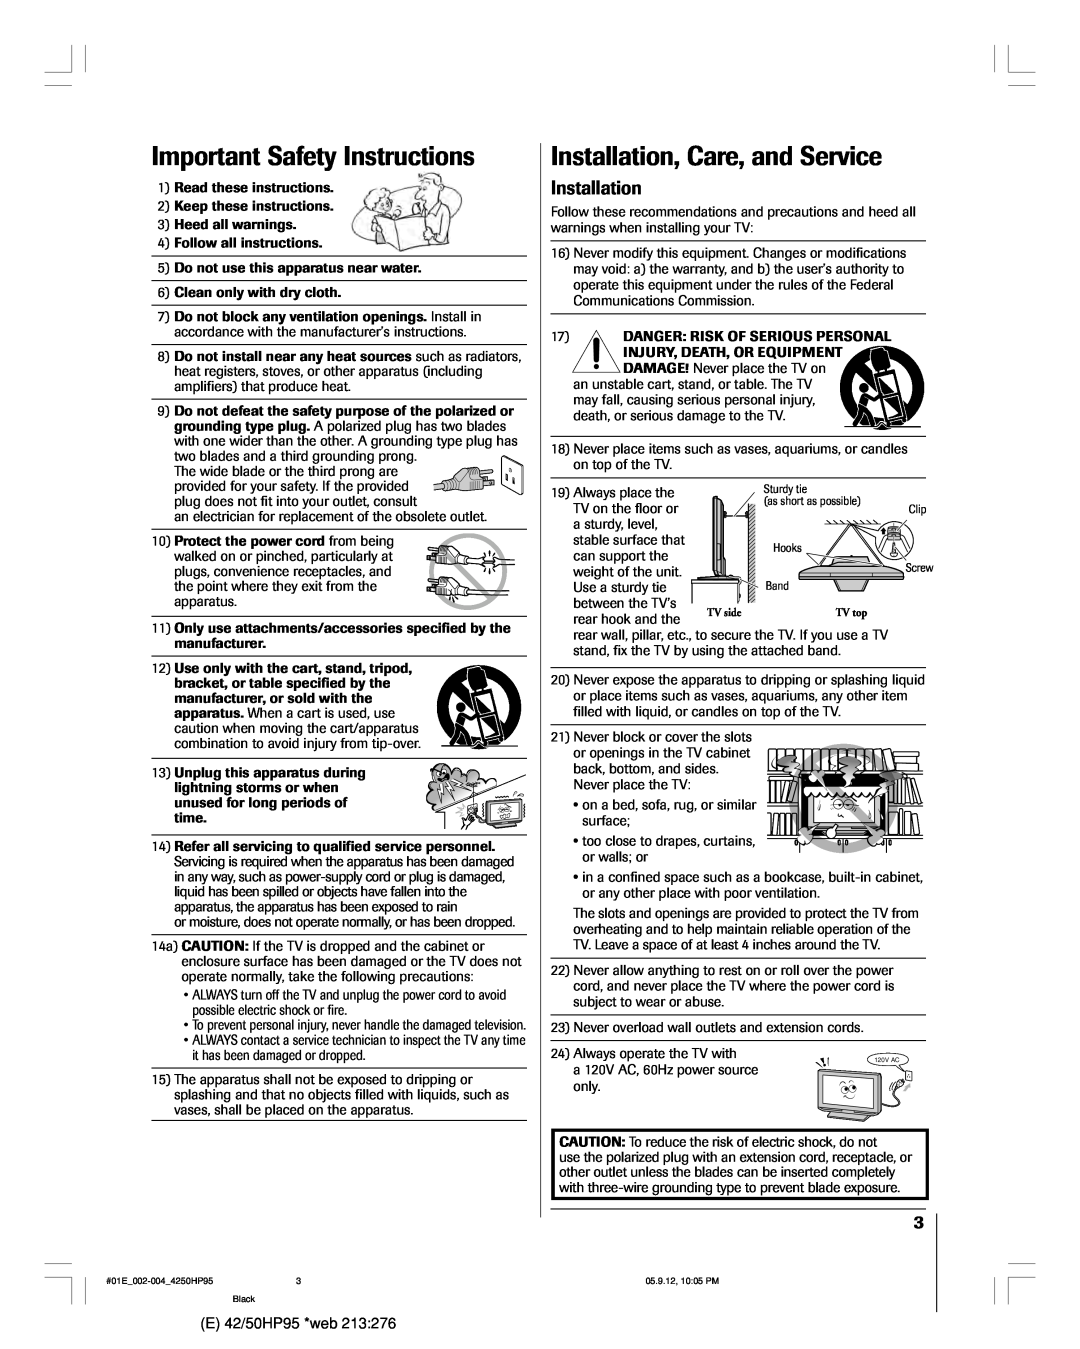 Toshiba 42HP95 owner manual Important Safety Instructions, Installation, Care, and Service 